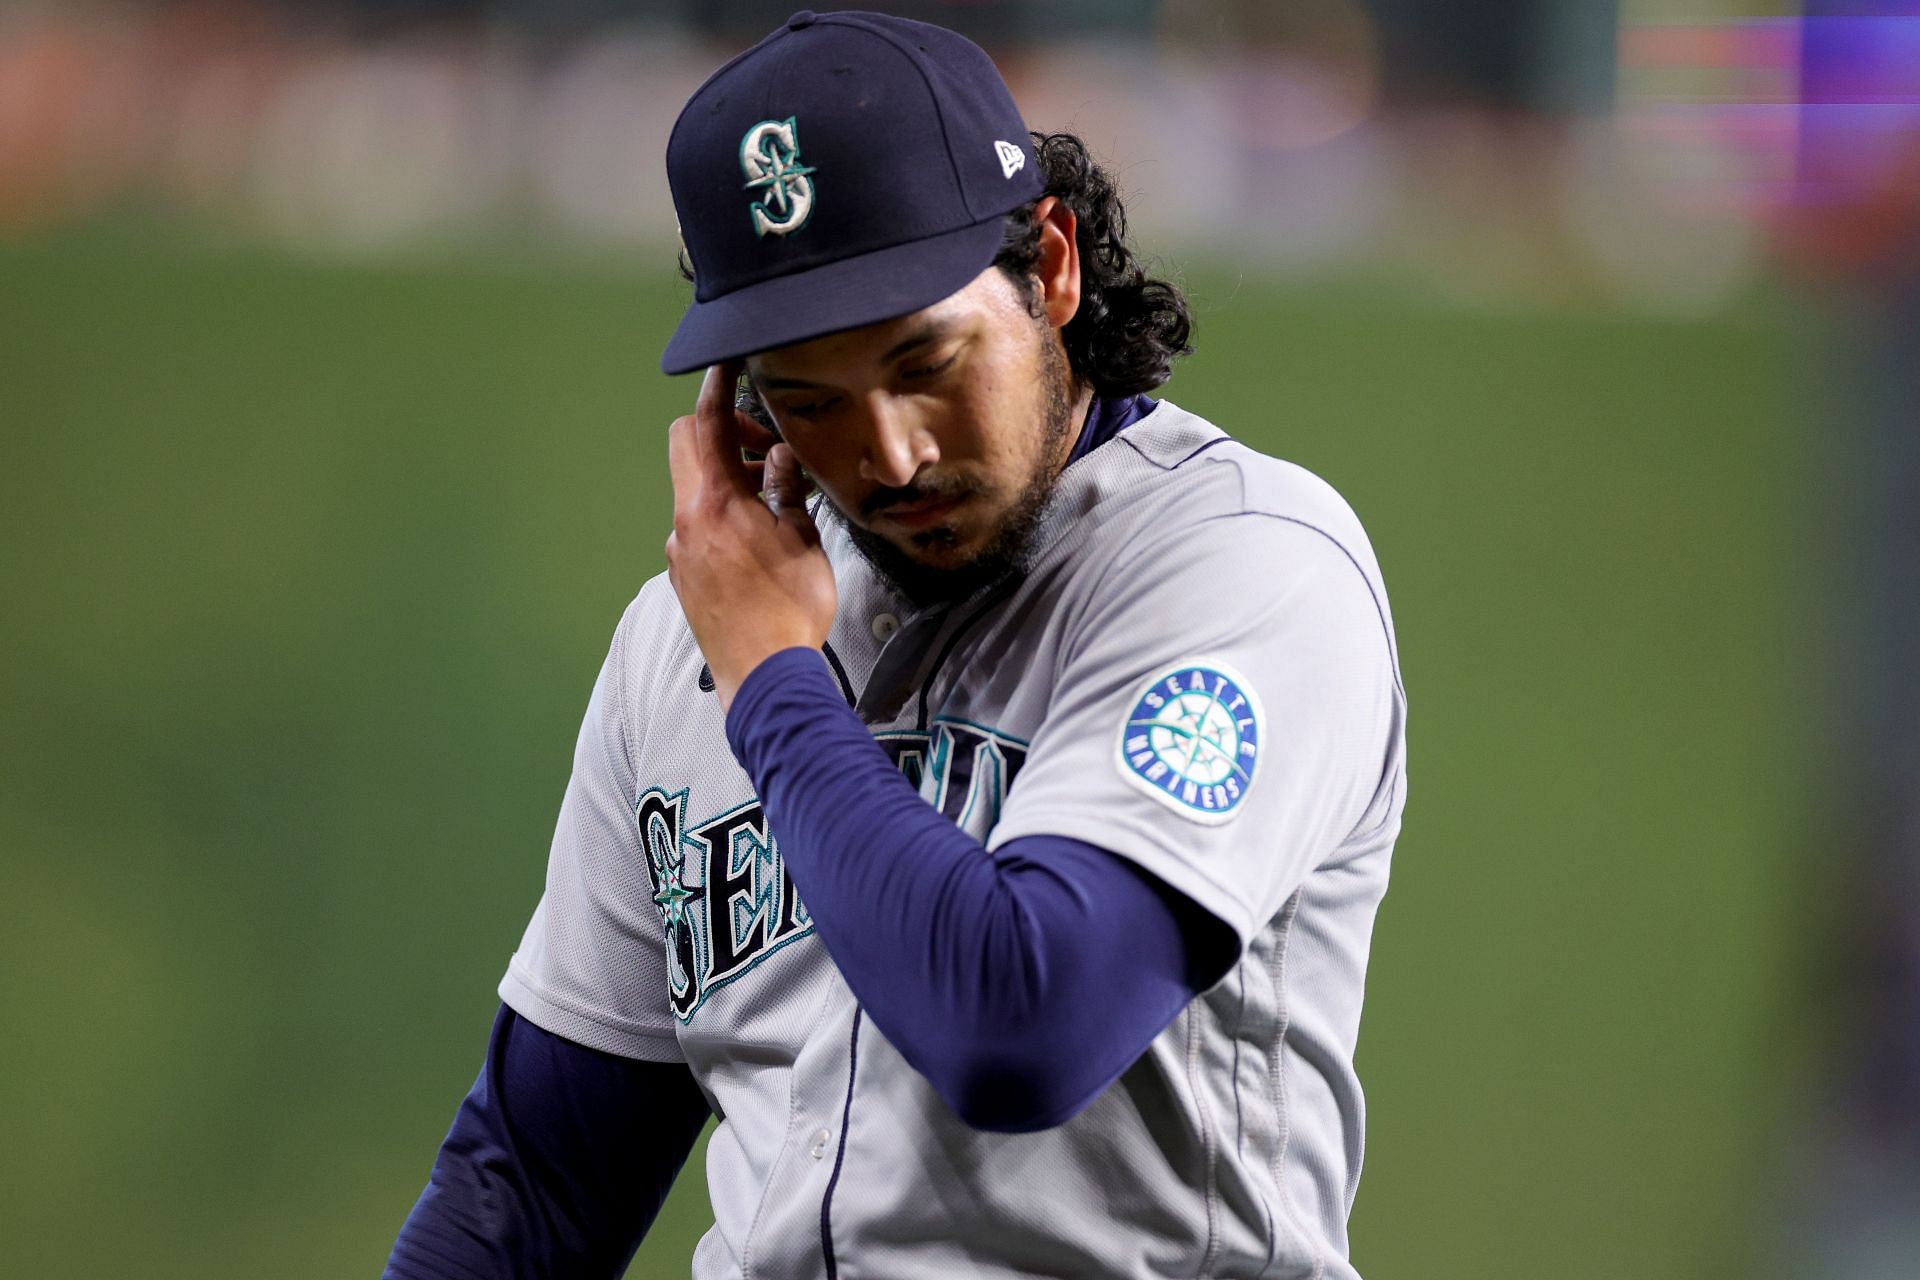 Amid high expectations, the message around the Mariners stays the same —  'get better